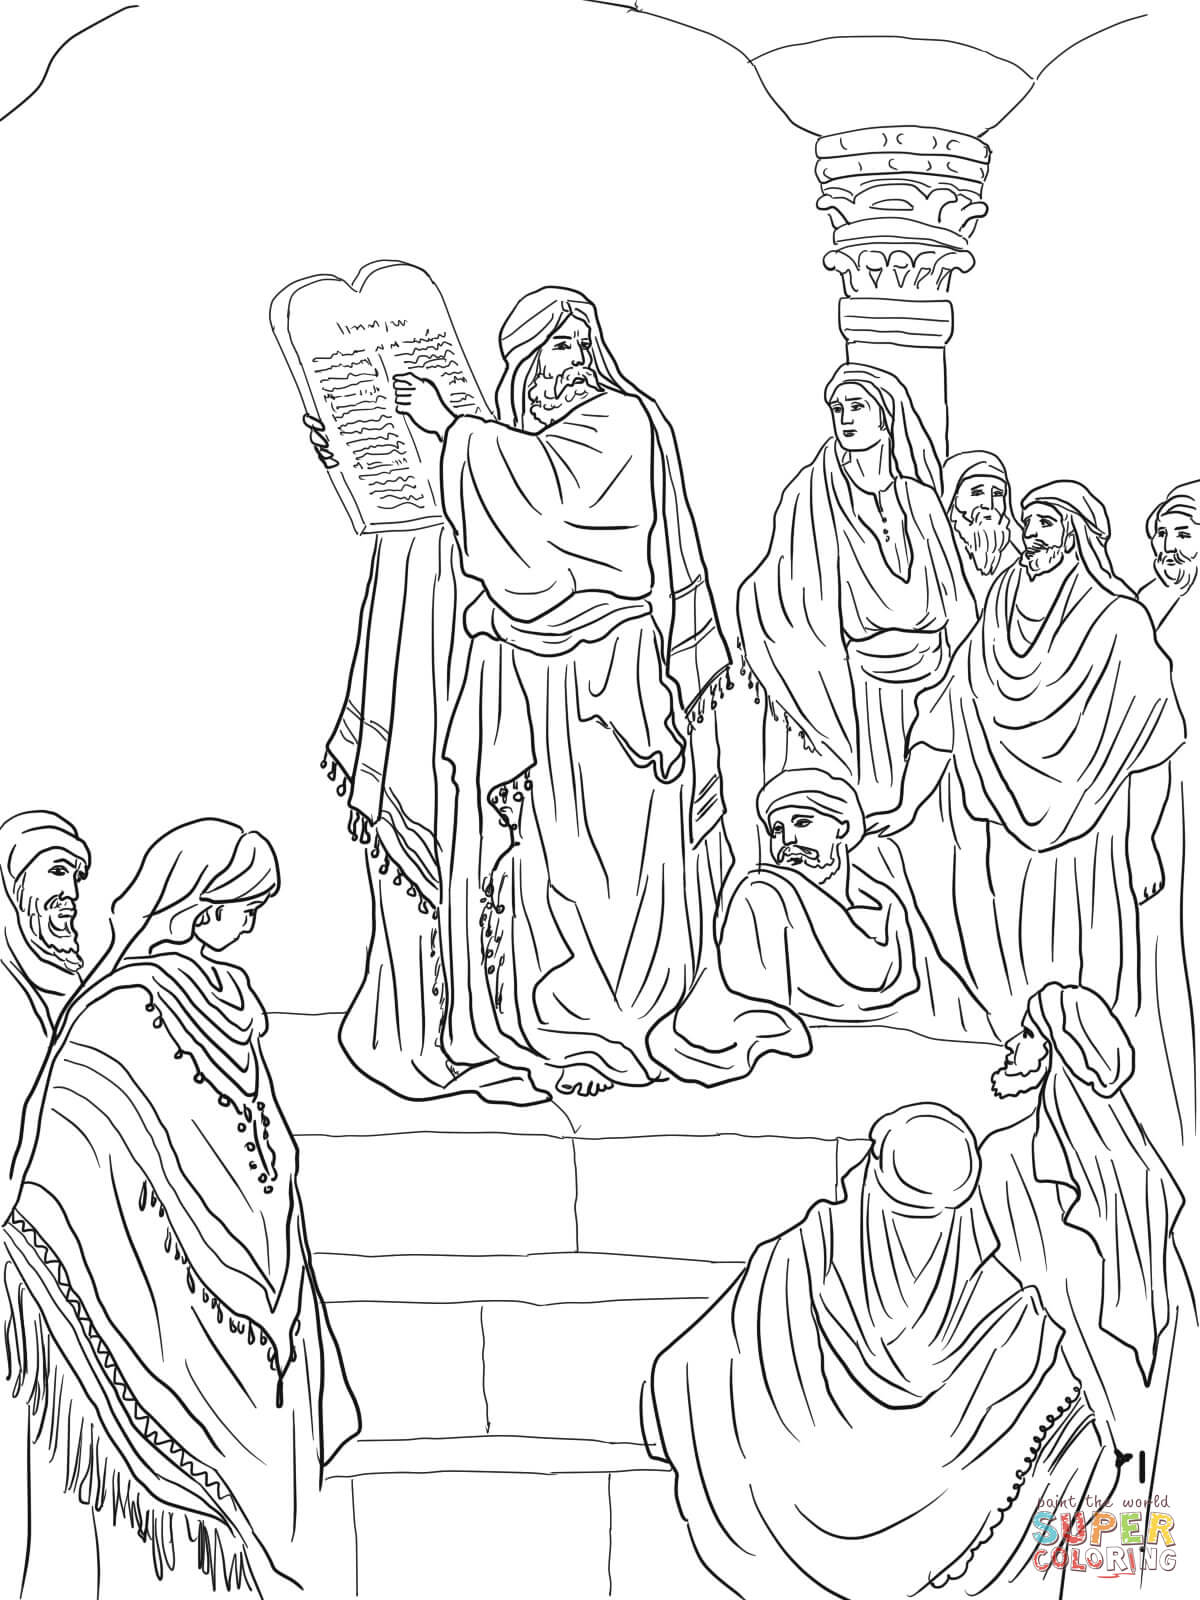 Ezra reading the law coloring page free printable coloring pages